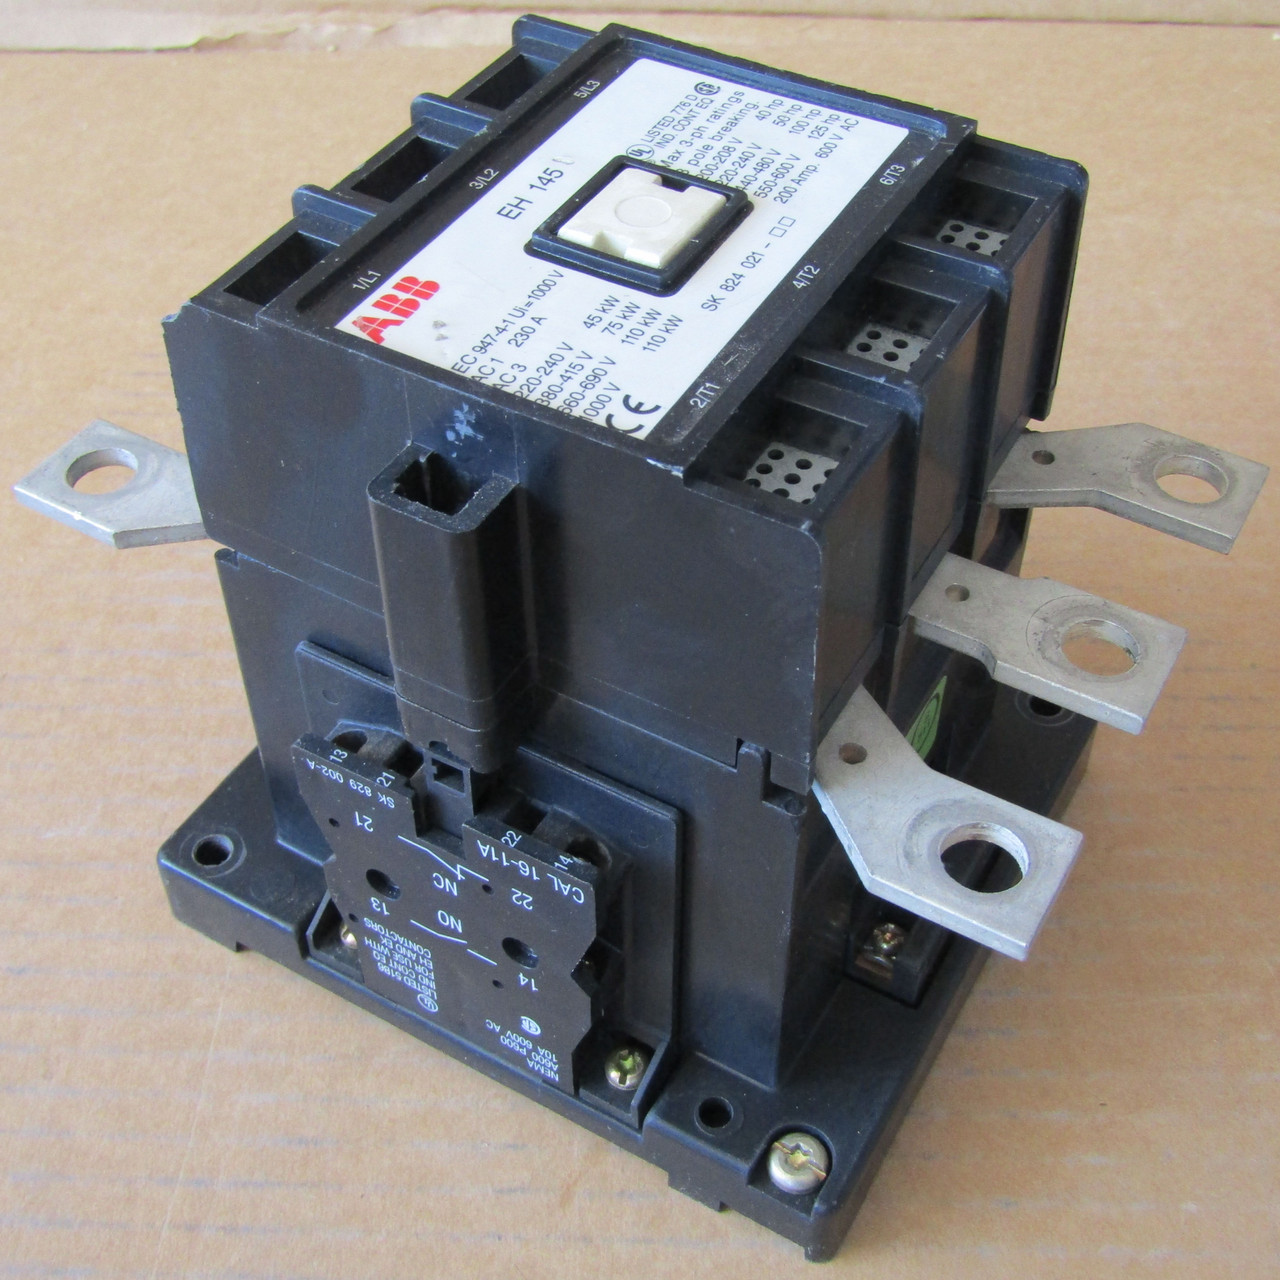 ABB EH145 Magnetic Contactor 200 Amp 3 Pole 600V 480V Coil - Used